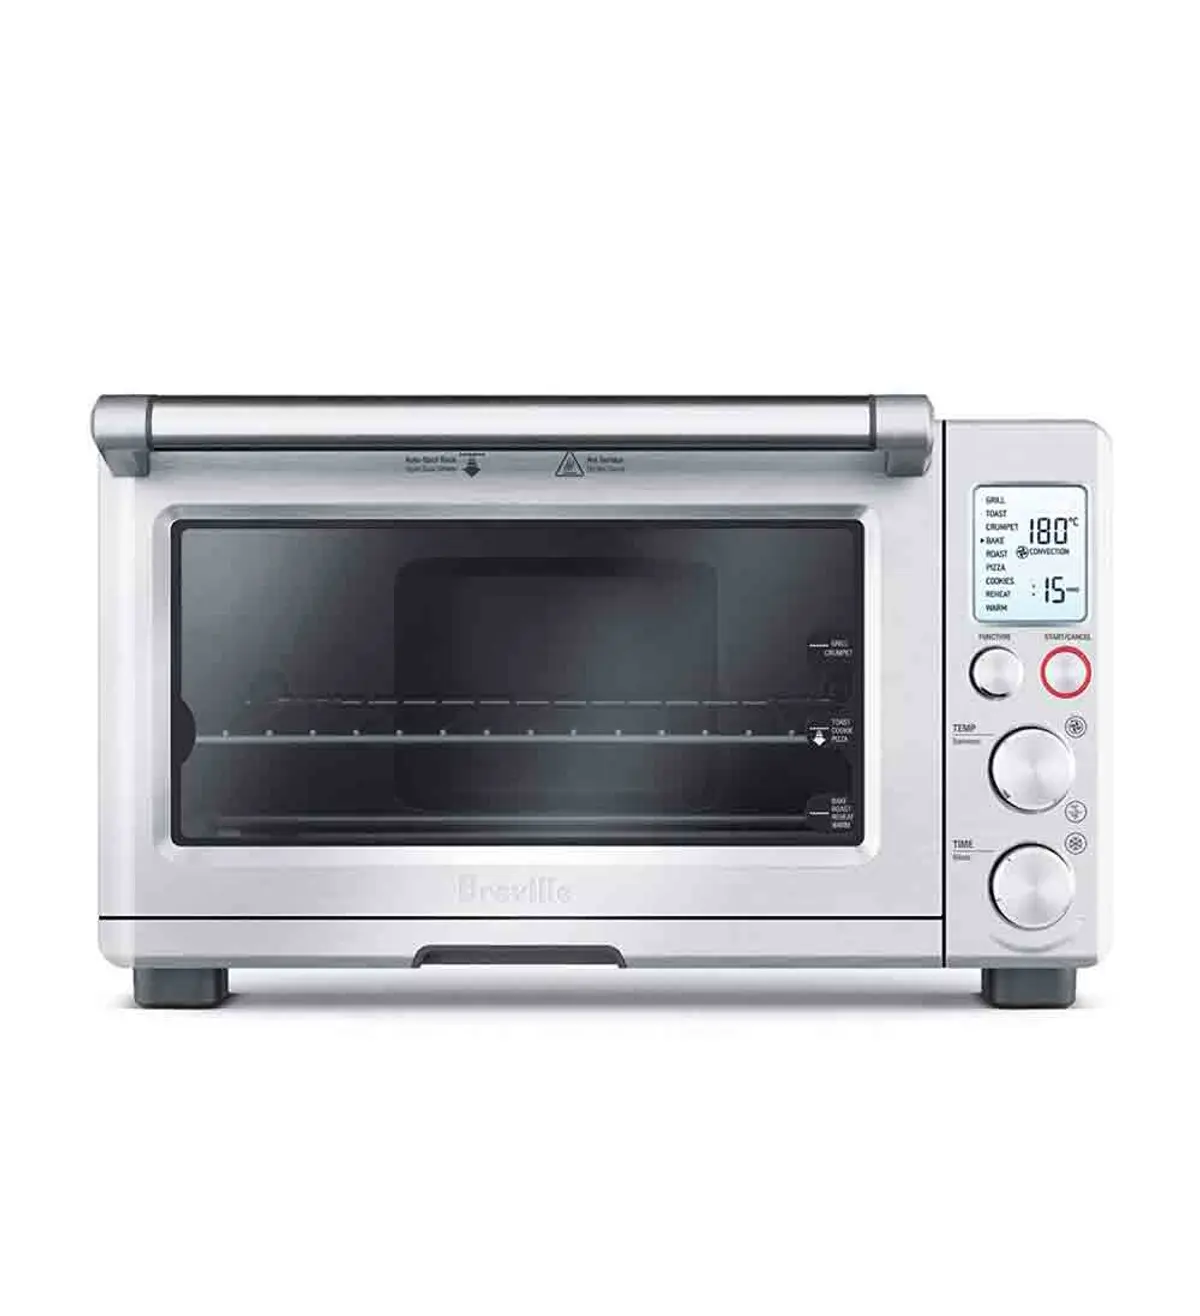 Breville BOV800XL Smart Oven Review